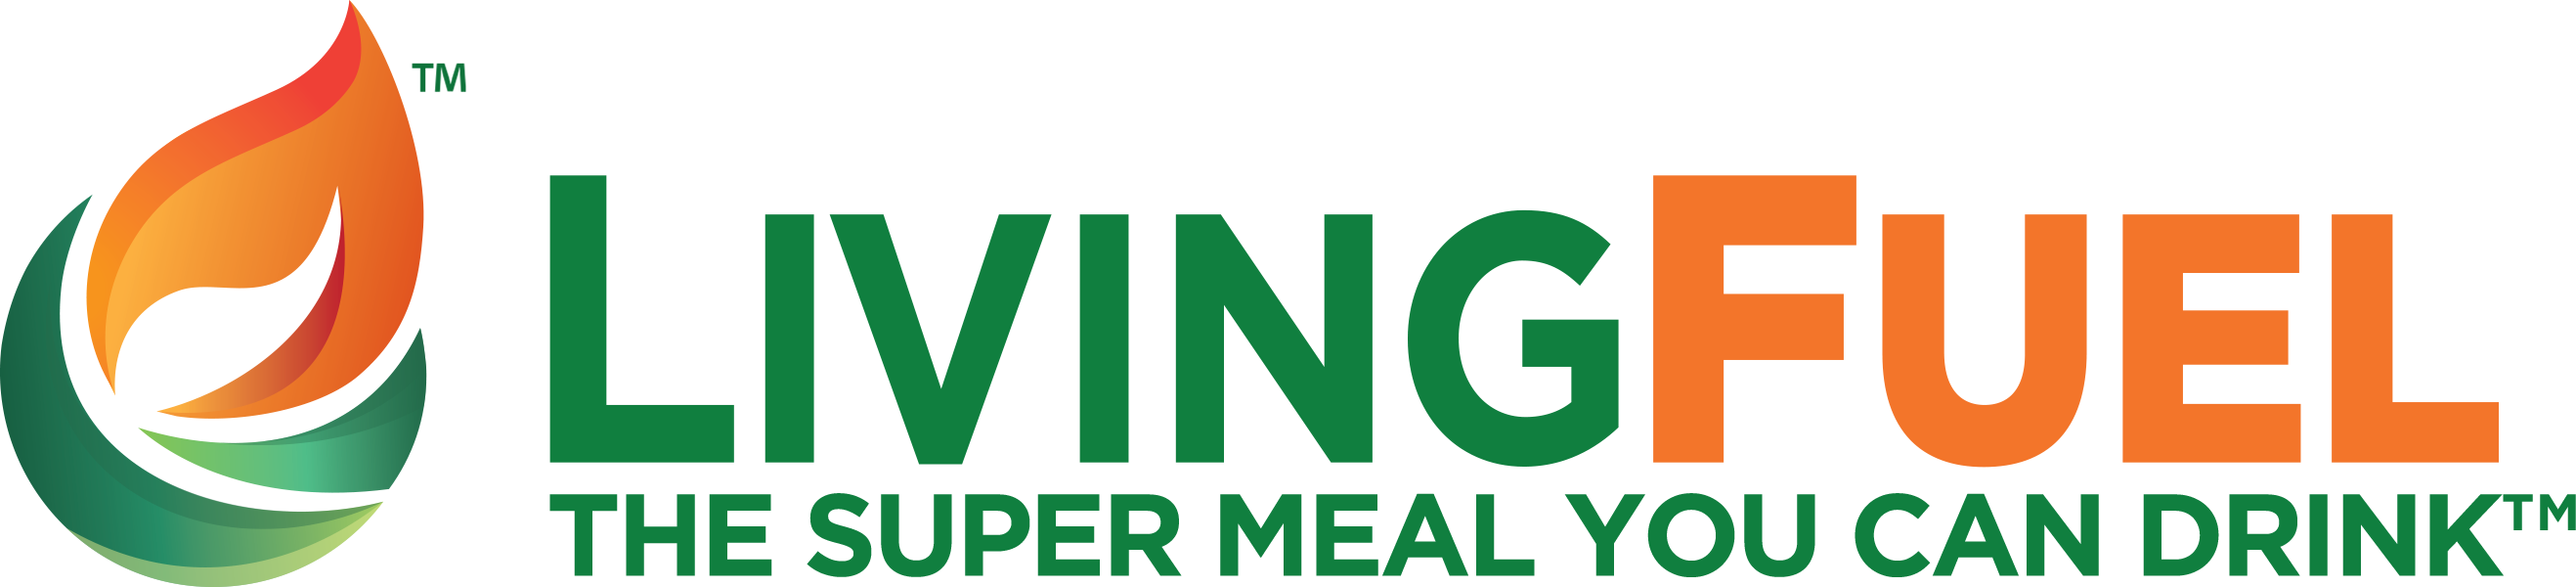 LIVING FUEL The Super Meal You can Drink